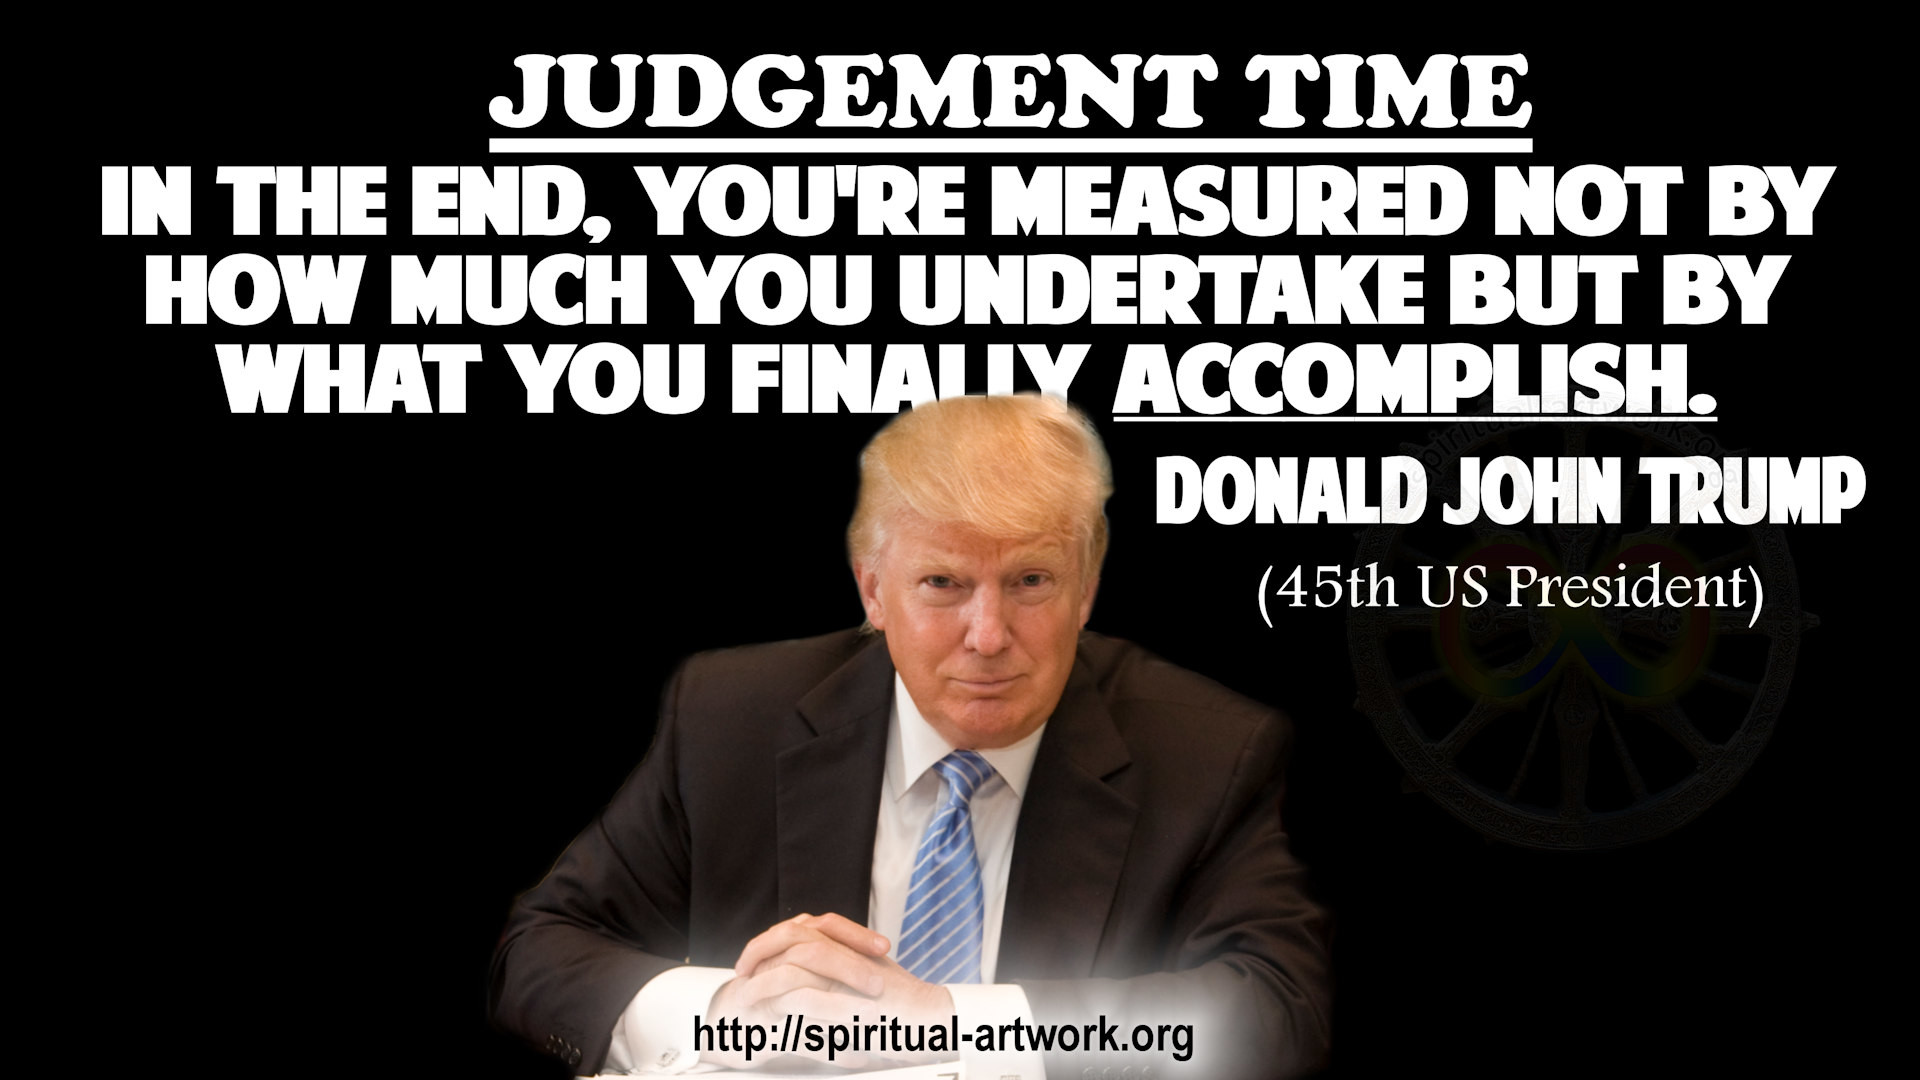 Donald Trump- In the end, you're measured not by how much you